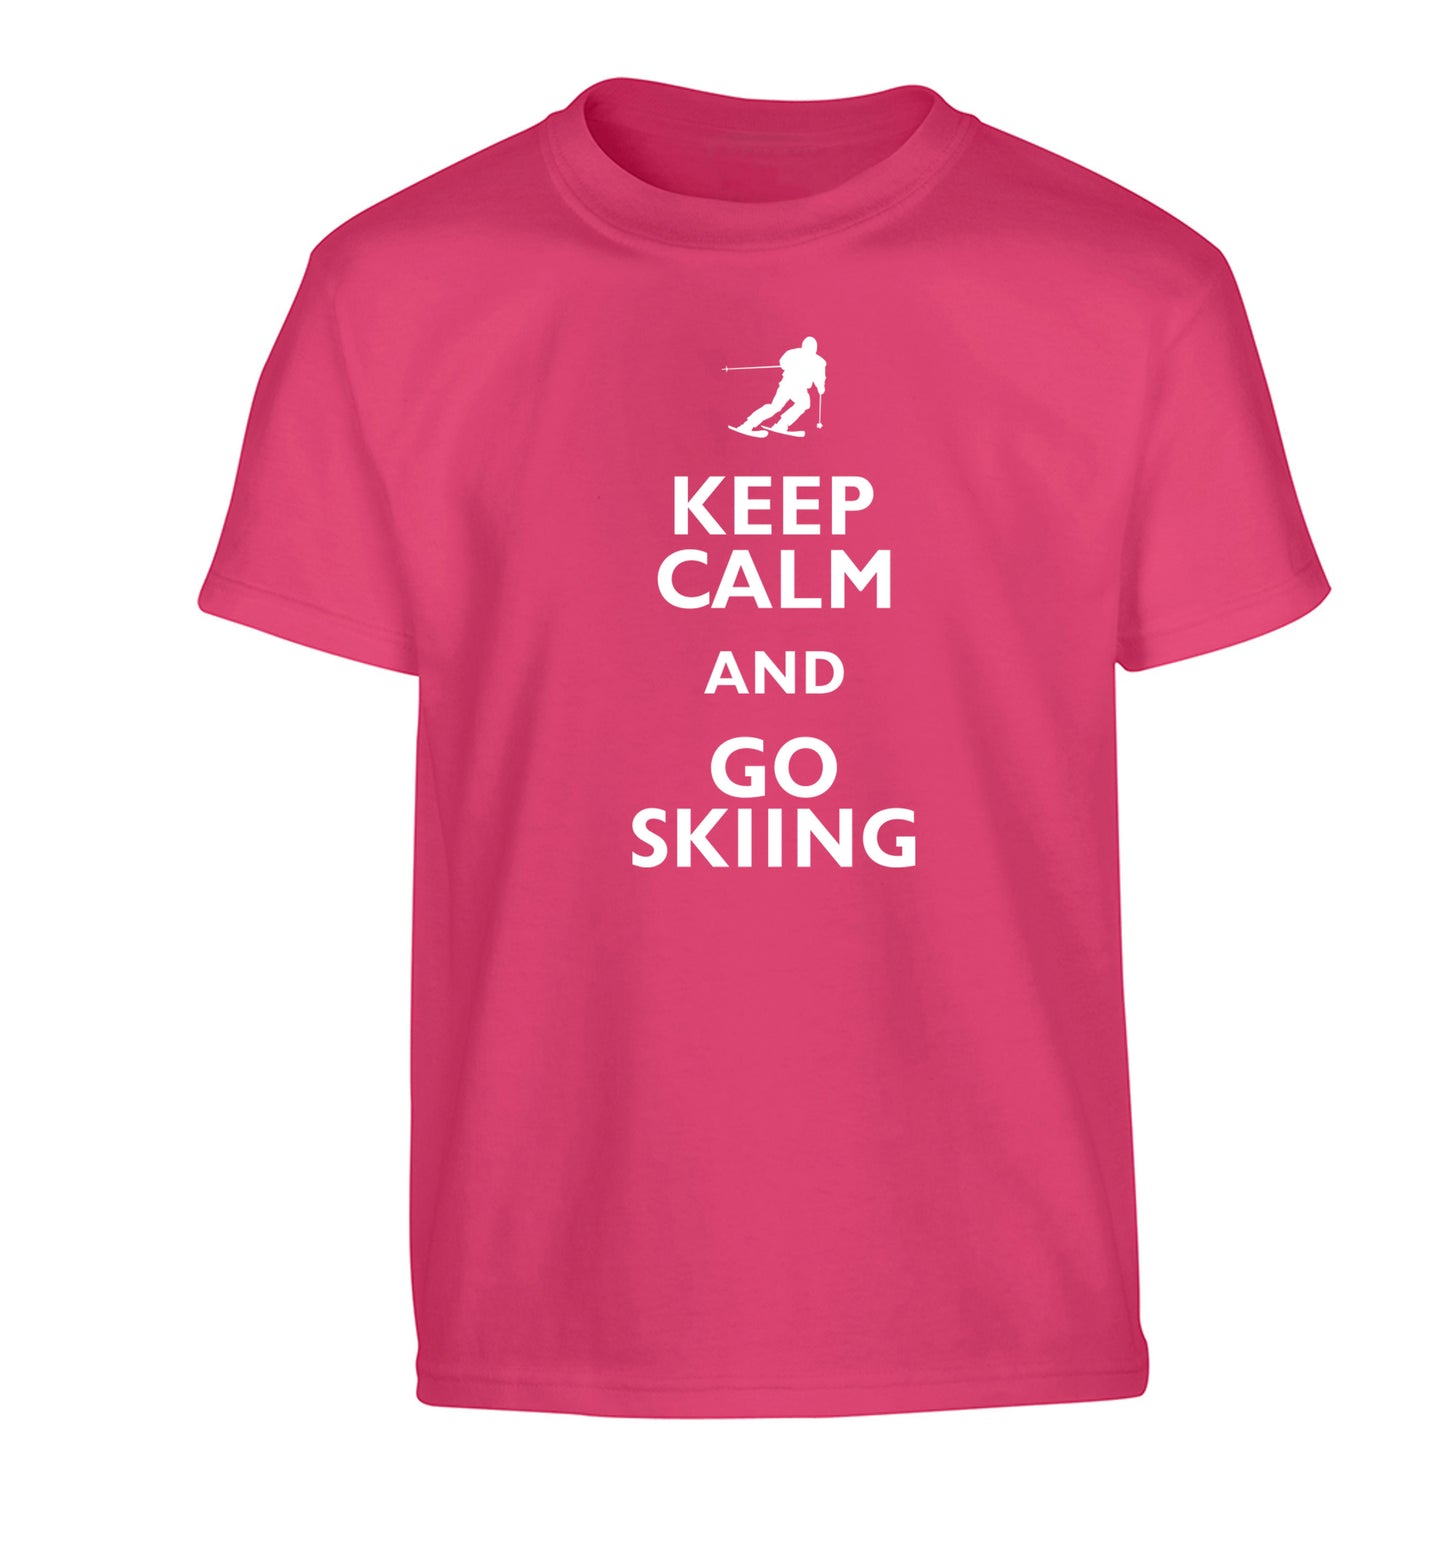 Keep calm and go skiing Children's pink Tshirt 12-14 Years